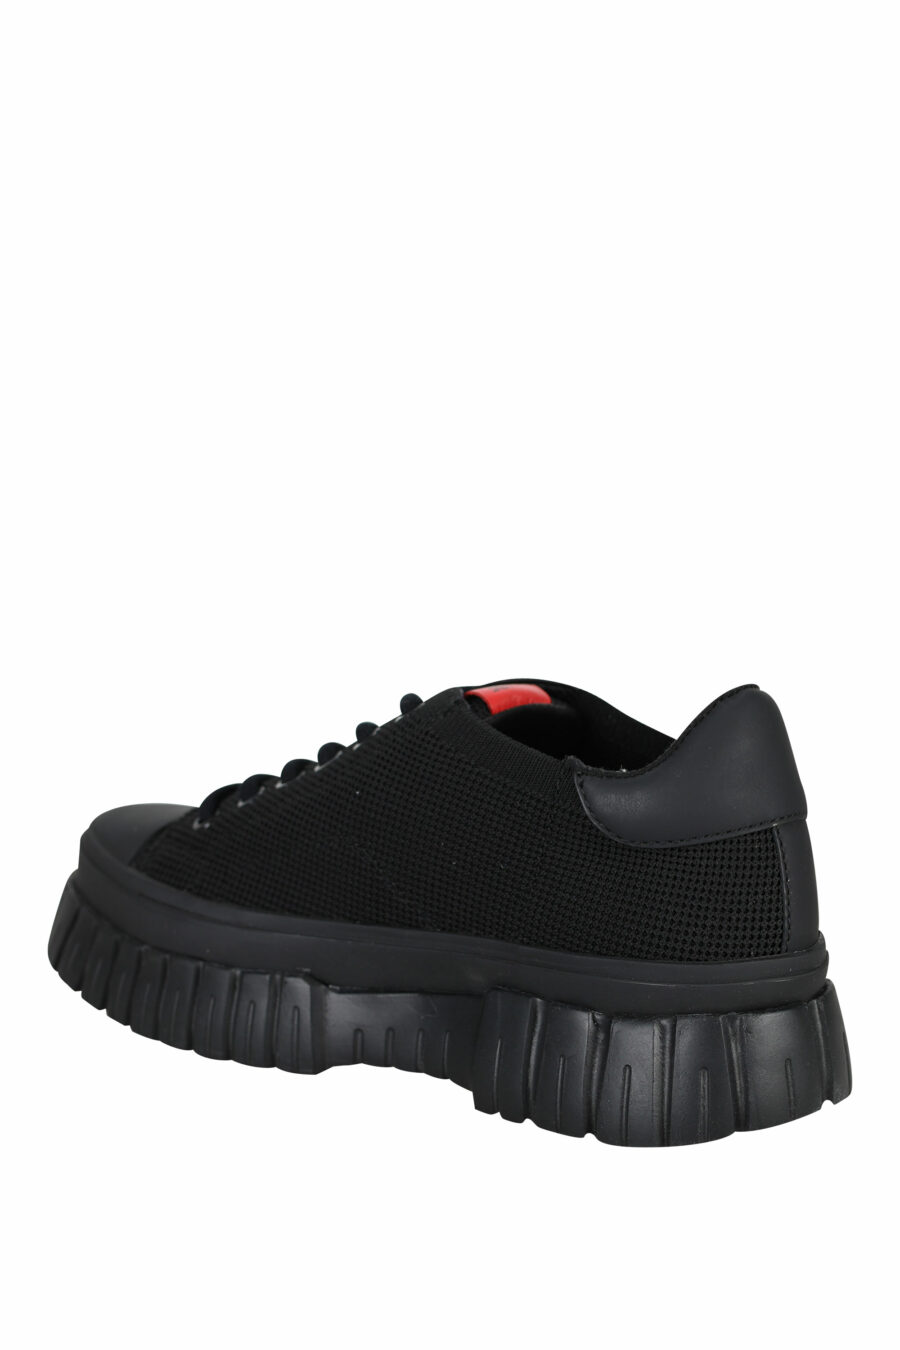 Black mix trainers with logo - 8054653167971 3